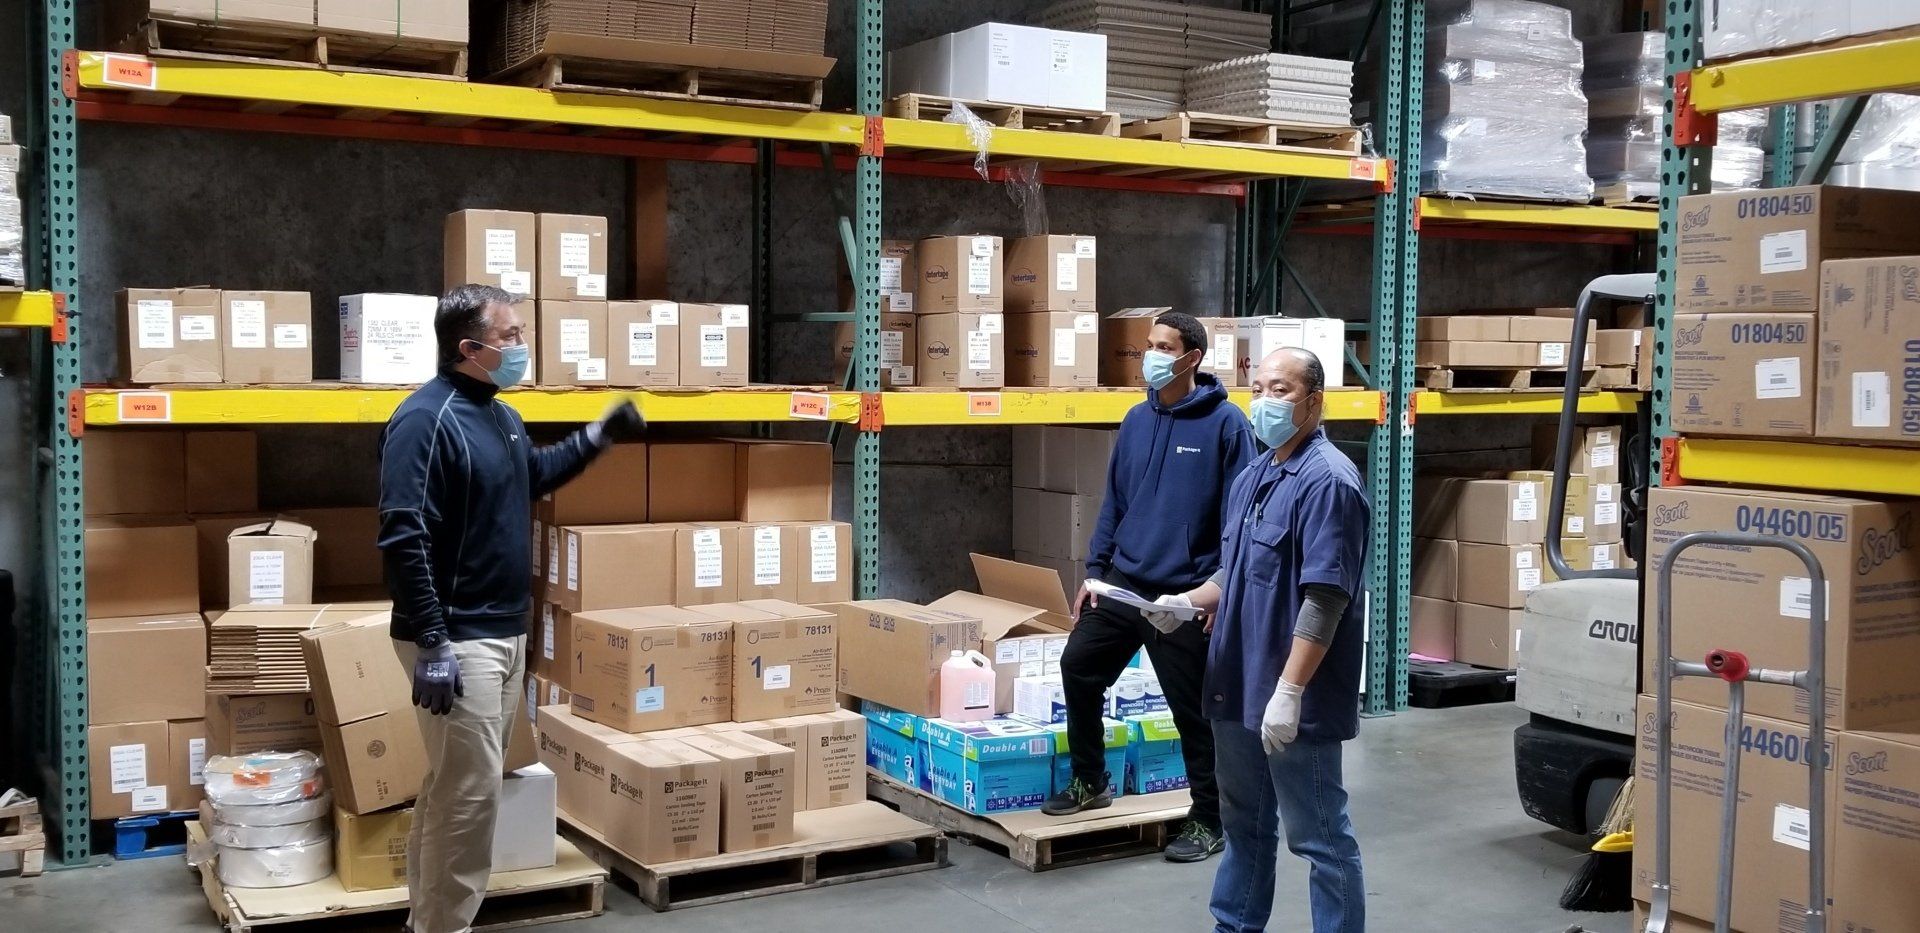 Warehouse Supplies in Seattle